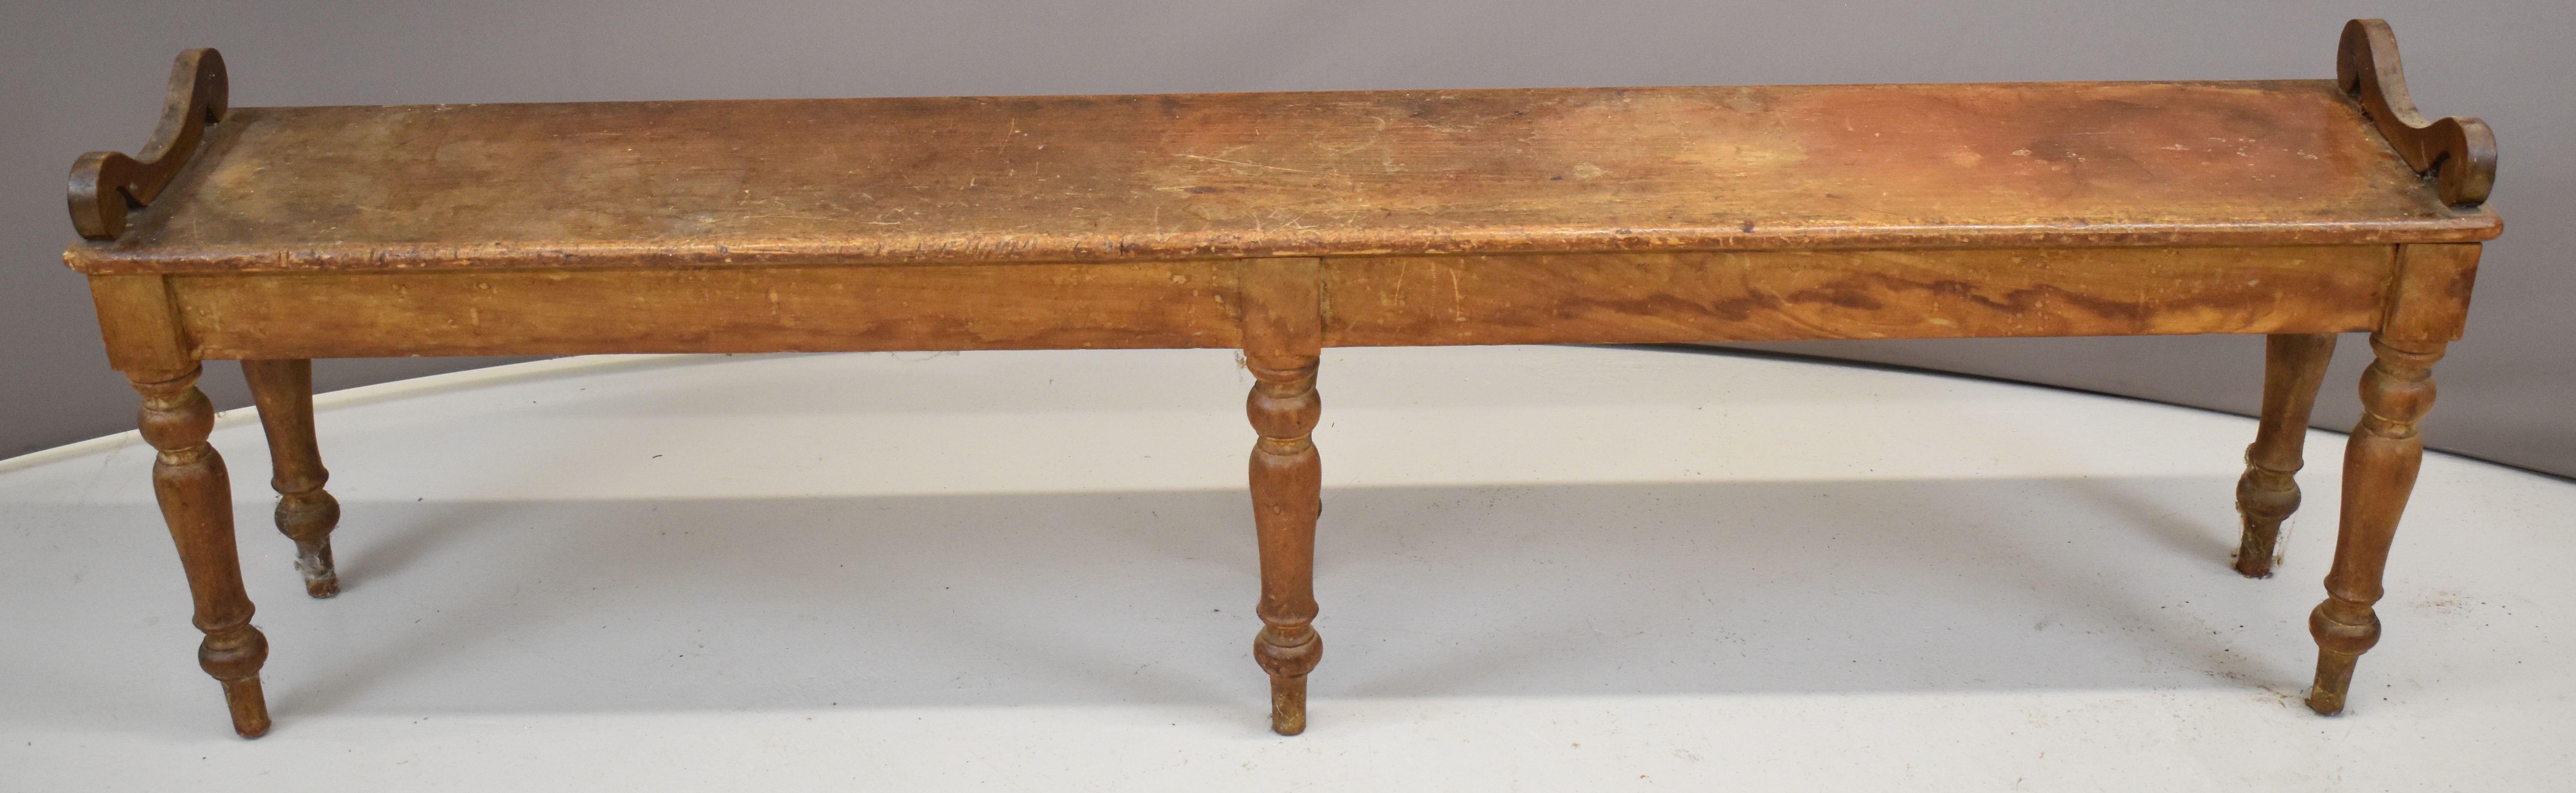 19thC ash window seat or low bench with scroll ends, raised on six turned legs, W193 x D30 x H46cm